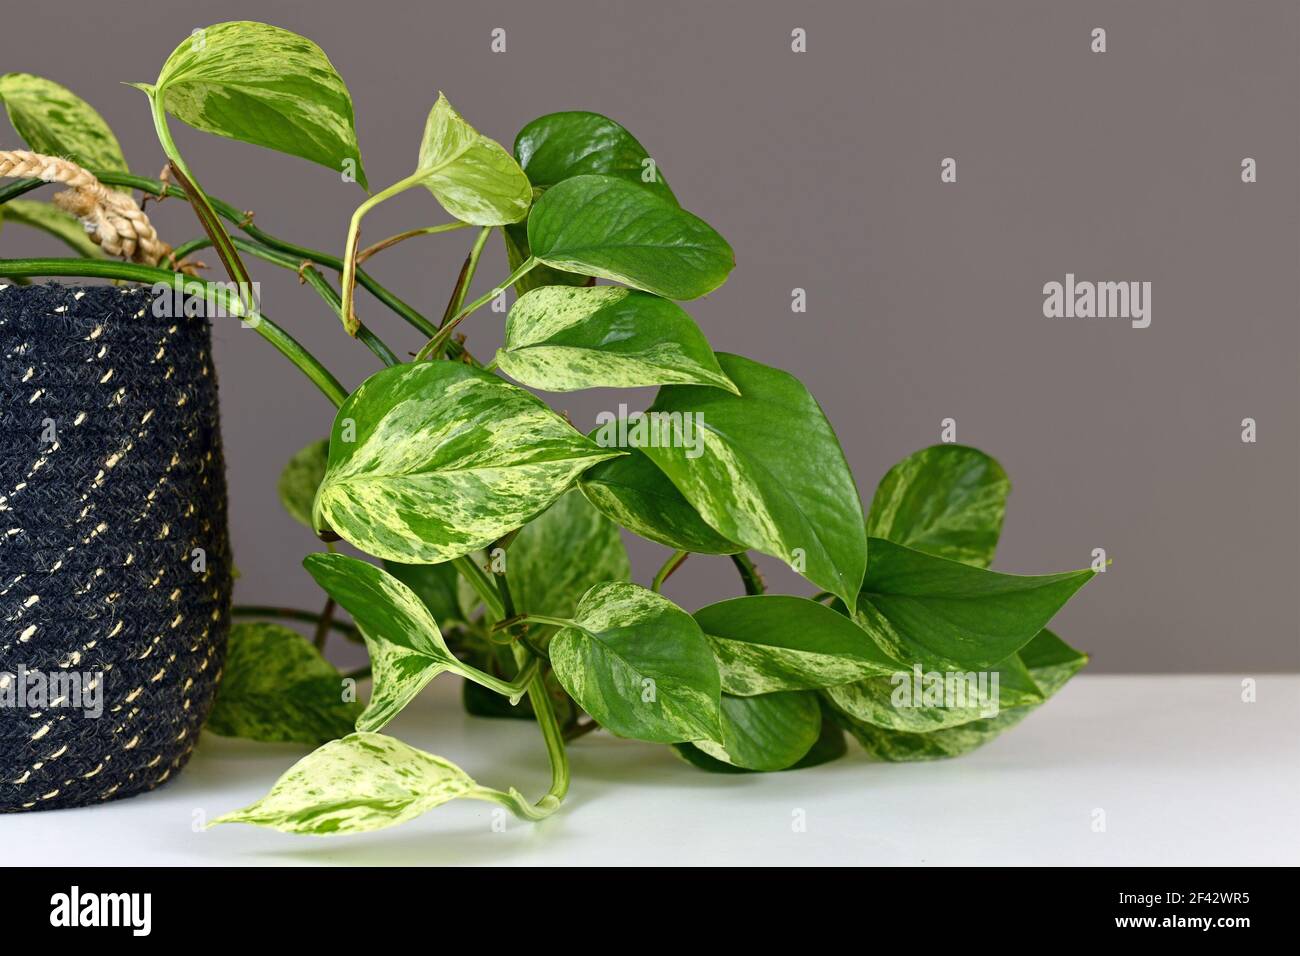 Leaves of tropical 'Epipremnum Aureum Marble Queen' pothos houseplant with white variegation in front of gray wall Stock Photo